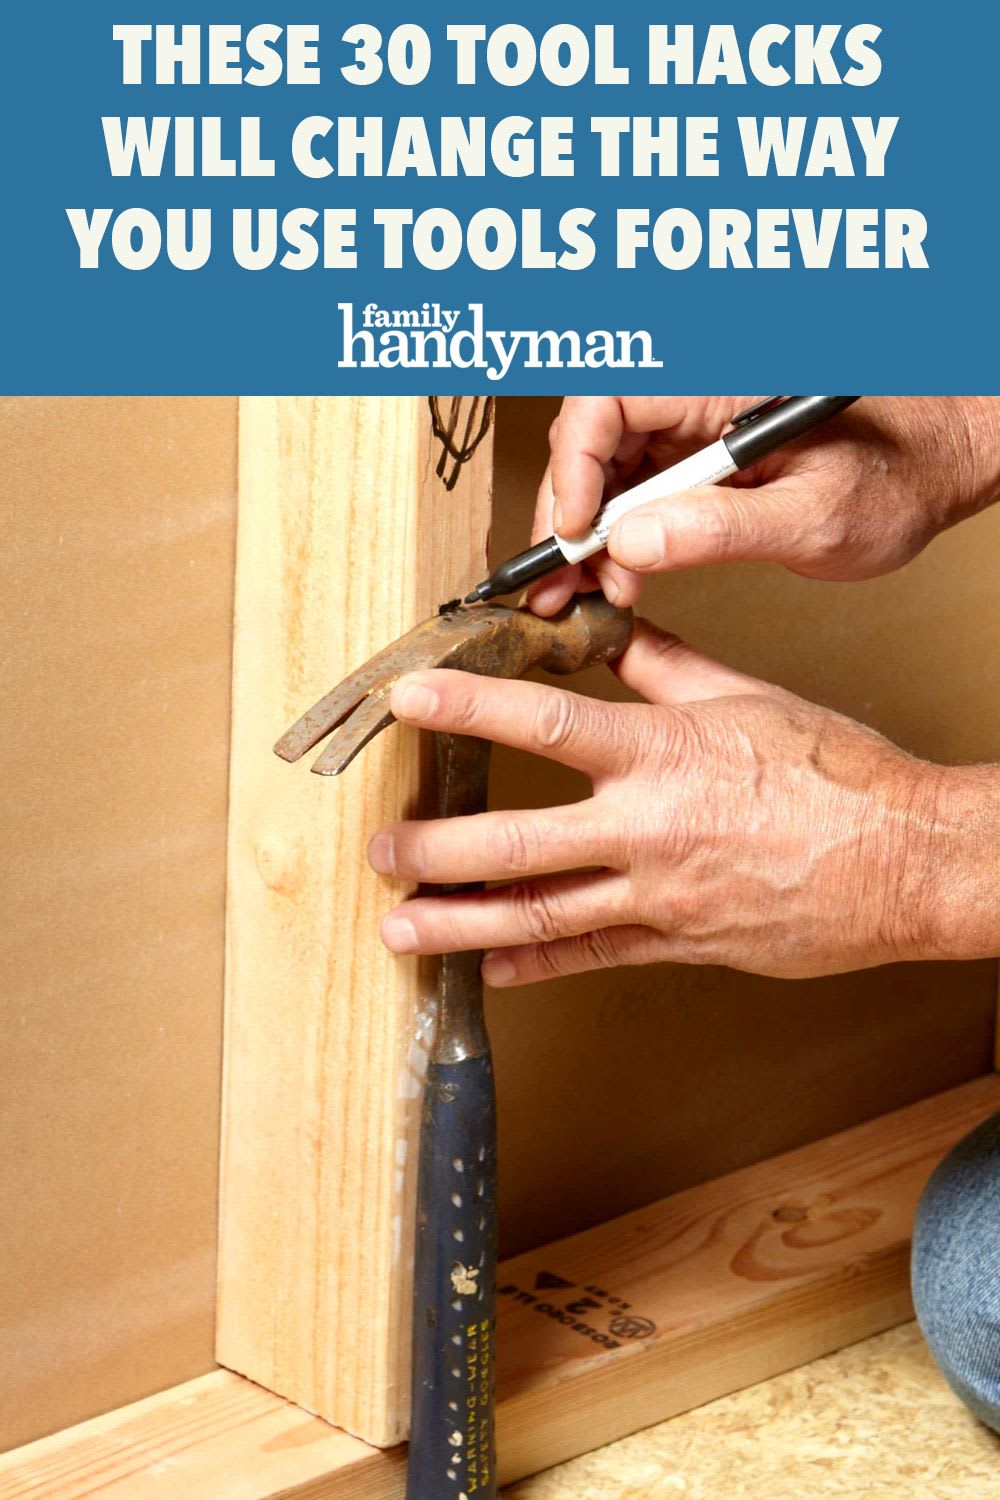 These 30 Tool Hacks Will Change the Way You Use Tools Forever